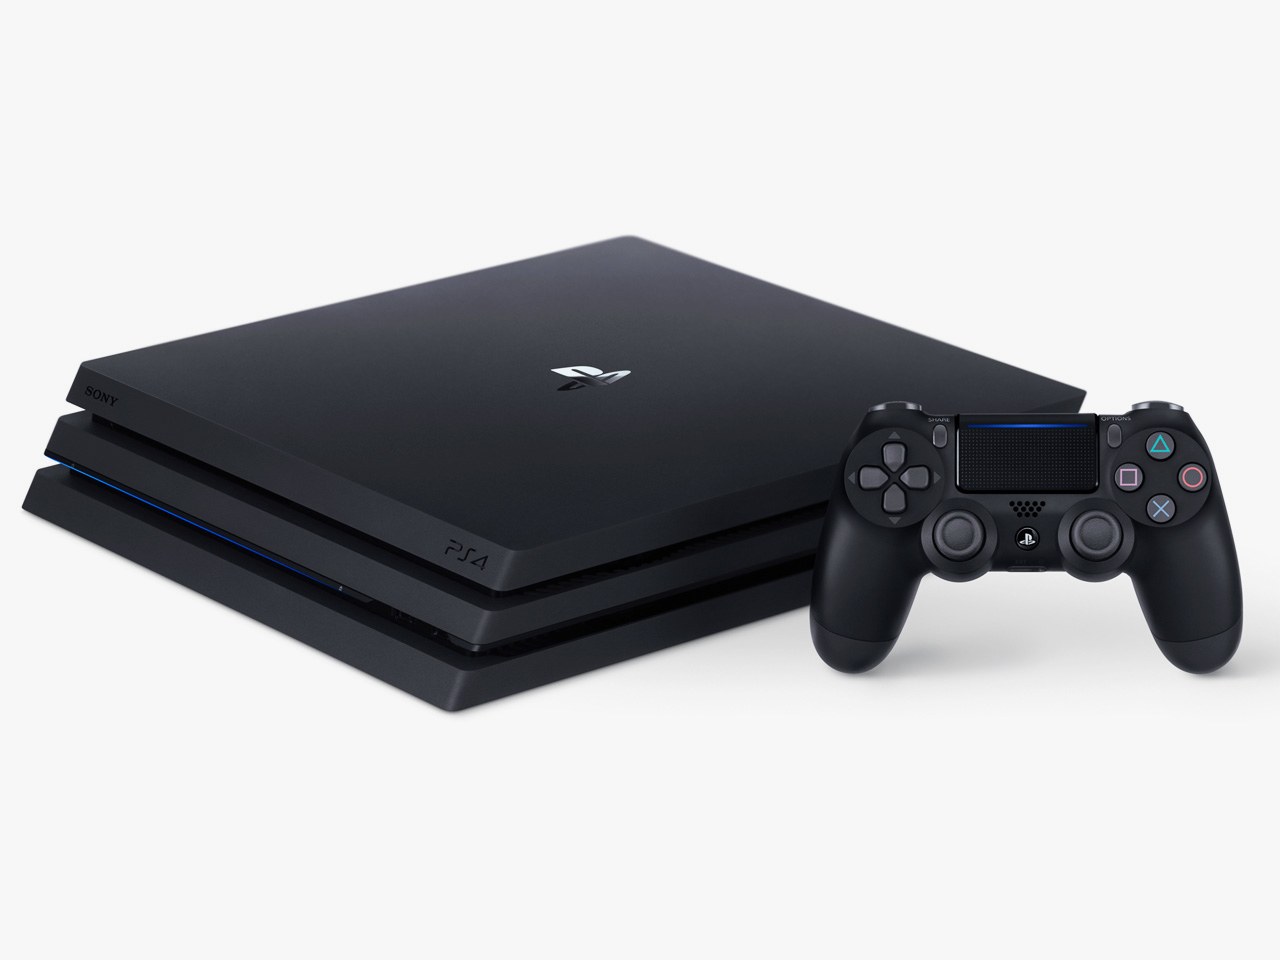 ps4 consoles sold to date